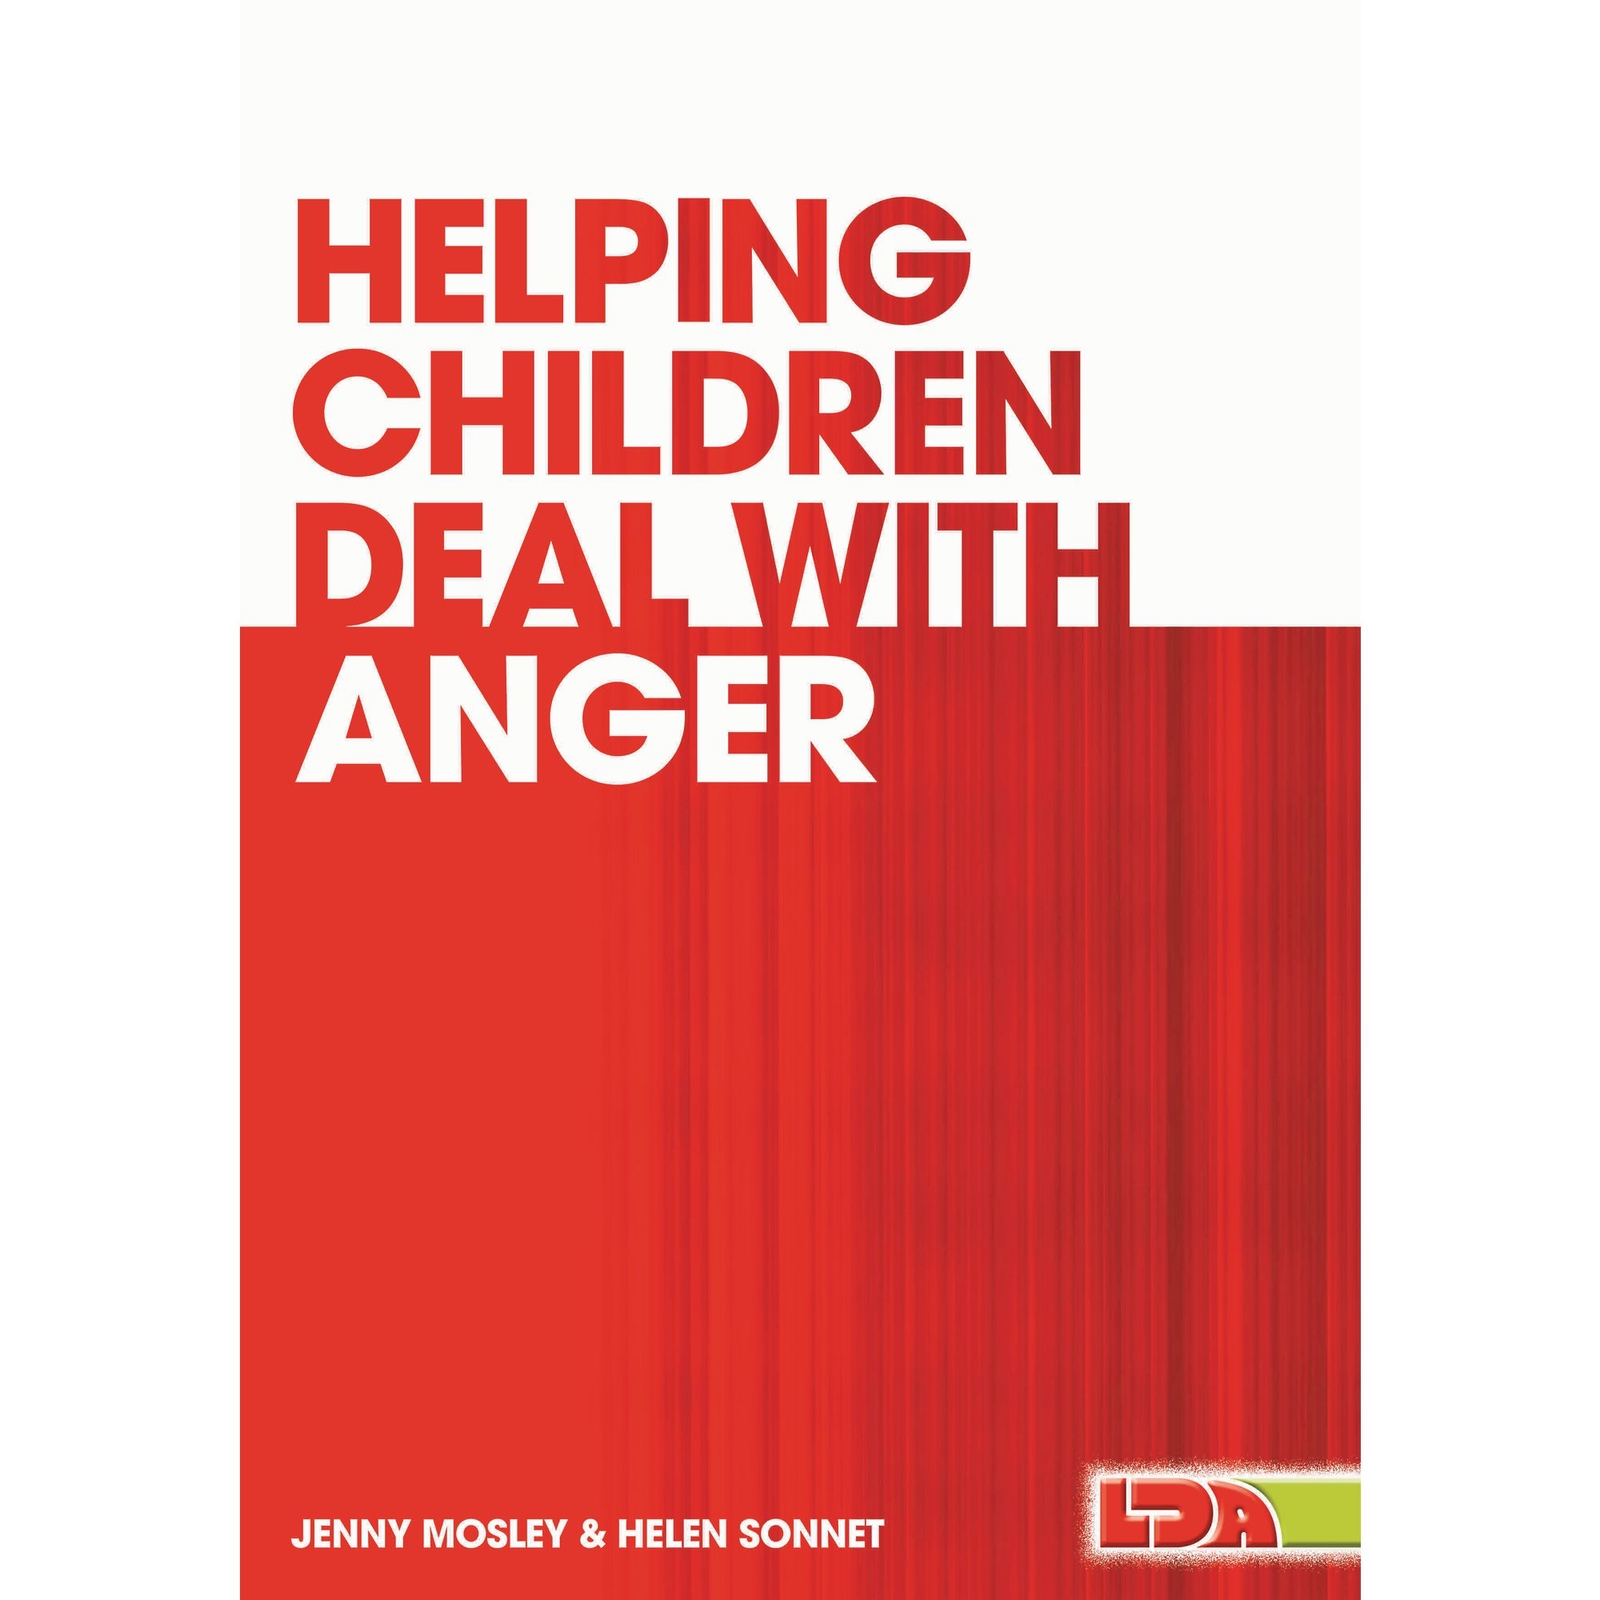 Helping Children Deal With Anger